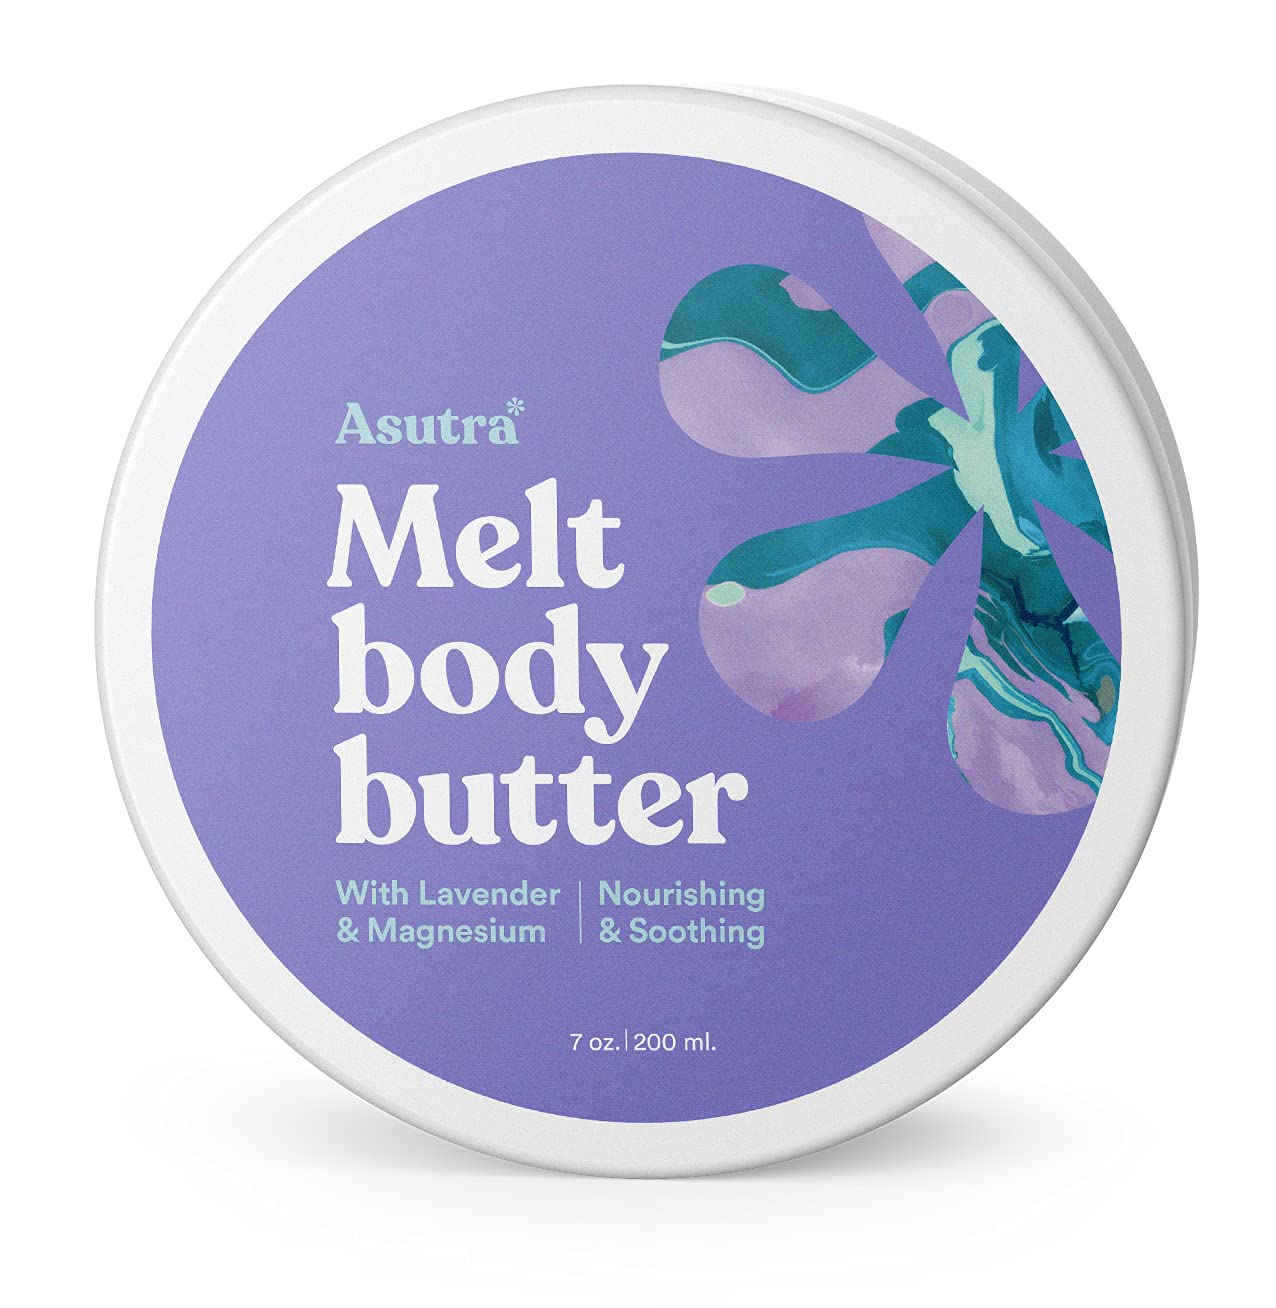 ASUTRA Magnesium Body Butter Lotion Lavender Scent | Natural Soothing Shea Butter & Almond Oil Moisturizer | Formulated with Premium-Quality Magnesium Oil to Recover & Revitalize, 7 oz